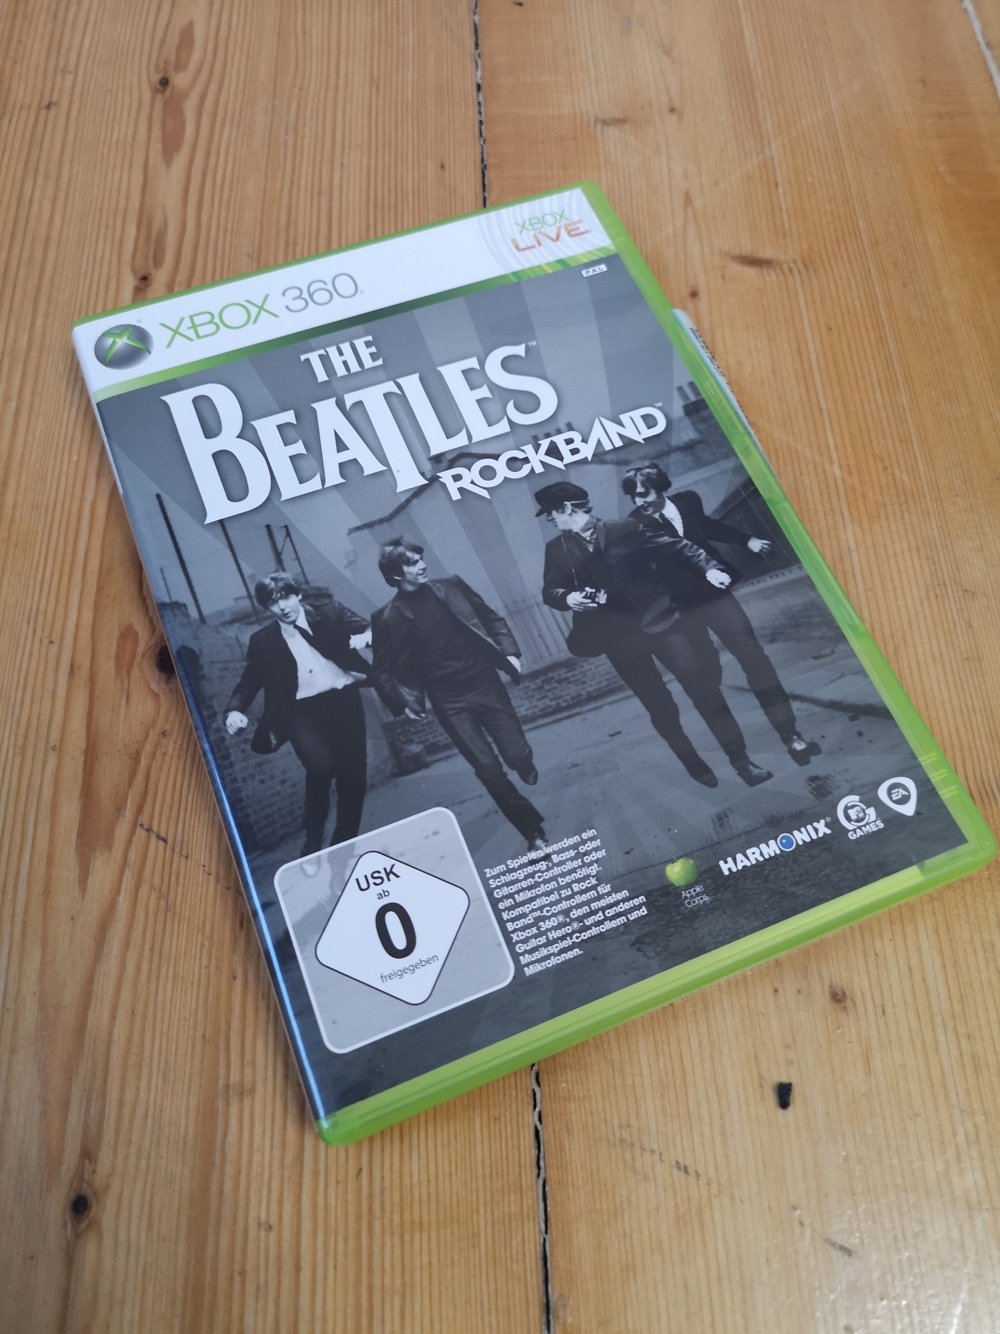 XBOX 360 The Beatles: Rock Band mit Anleitung in OVP